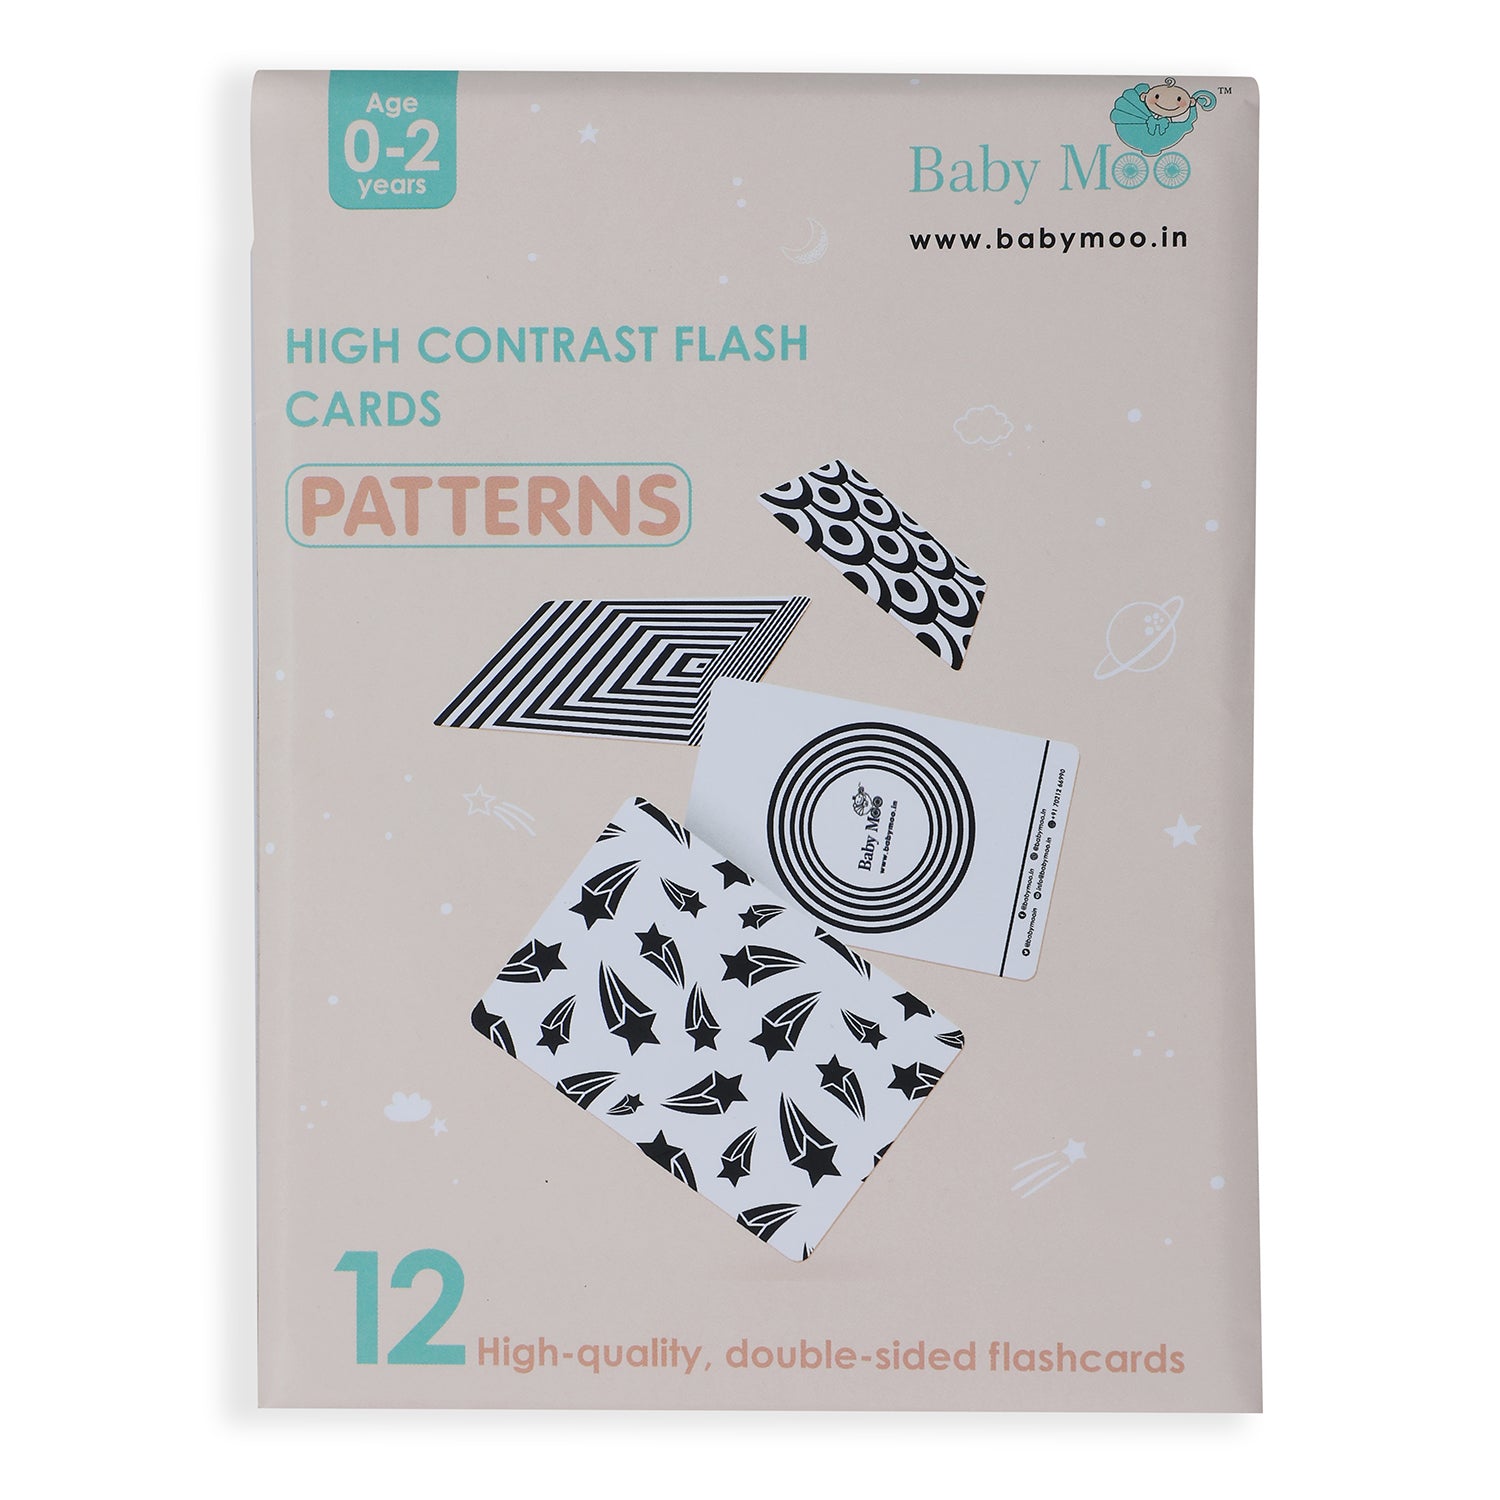 Baby Moo High Contrast Flash Cards Pack of 12 - Patterns - Baby Moo